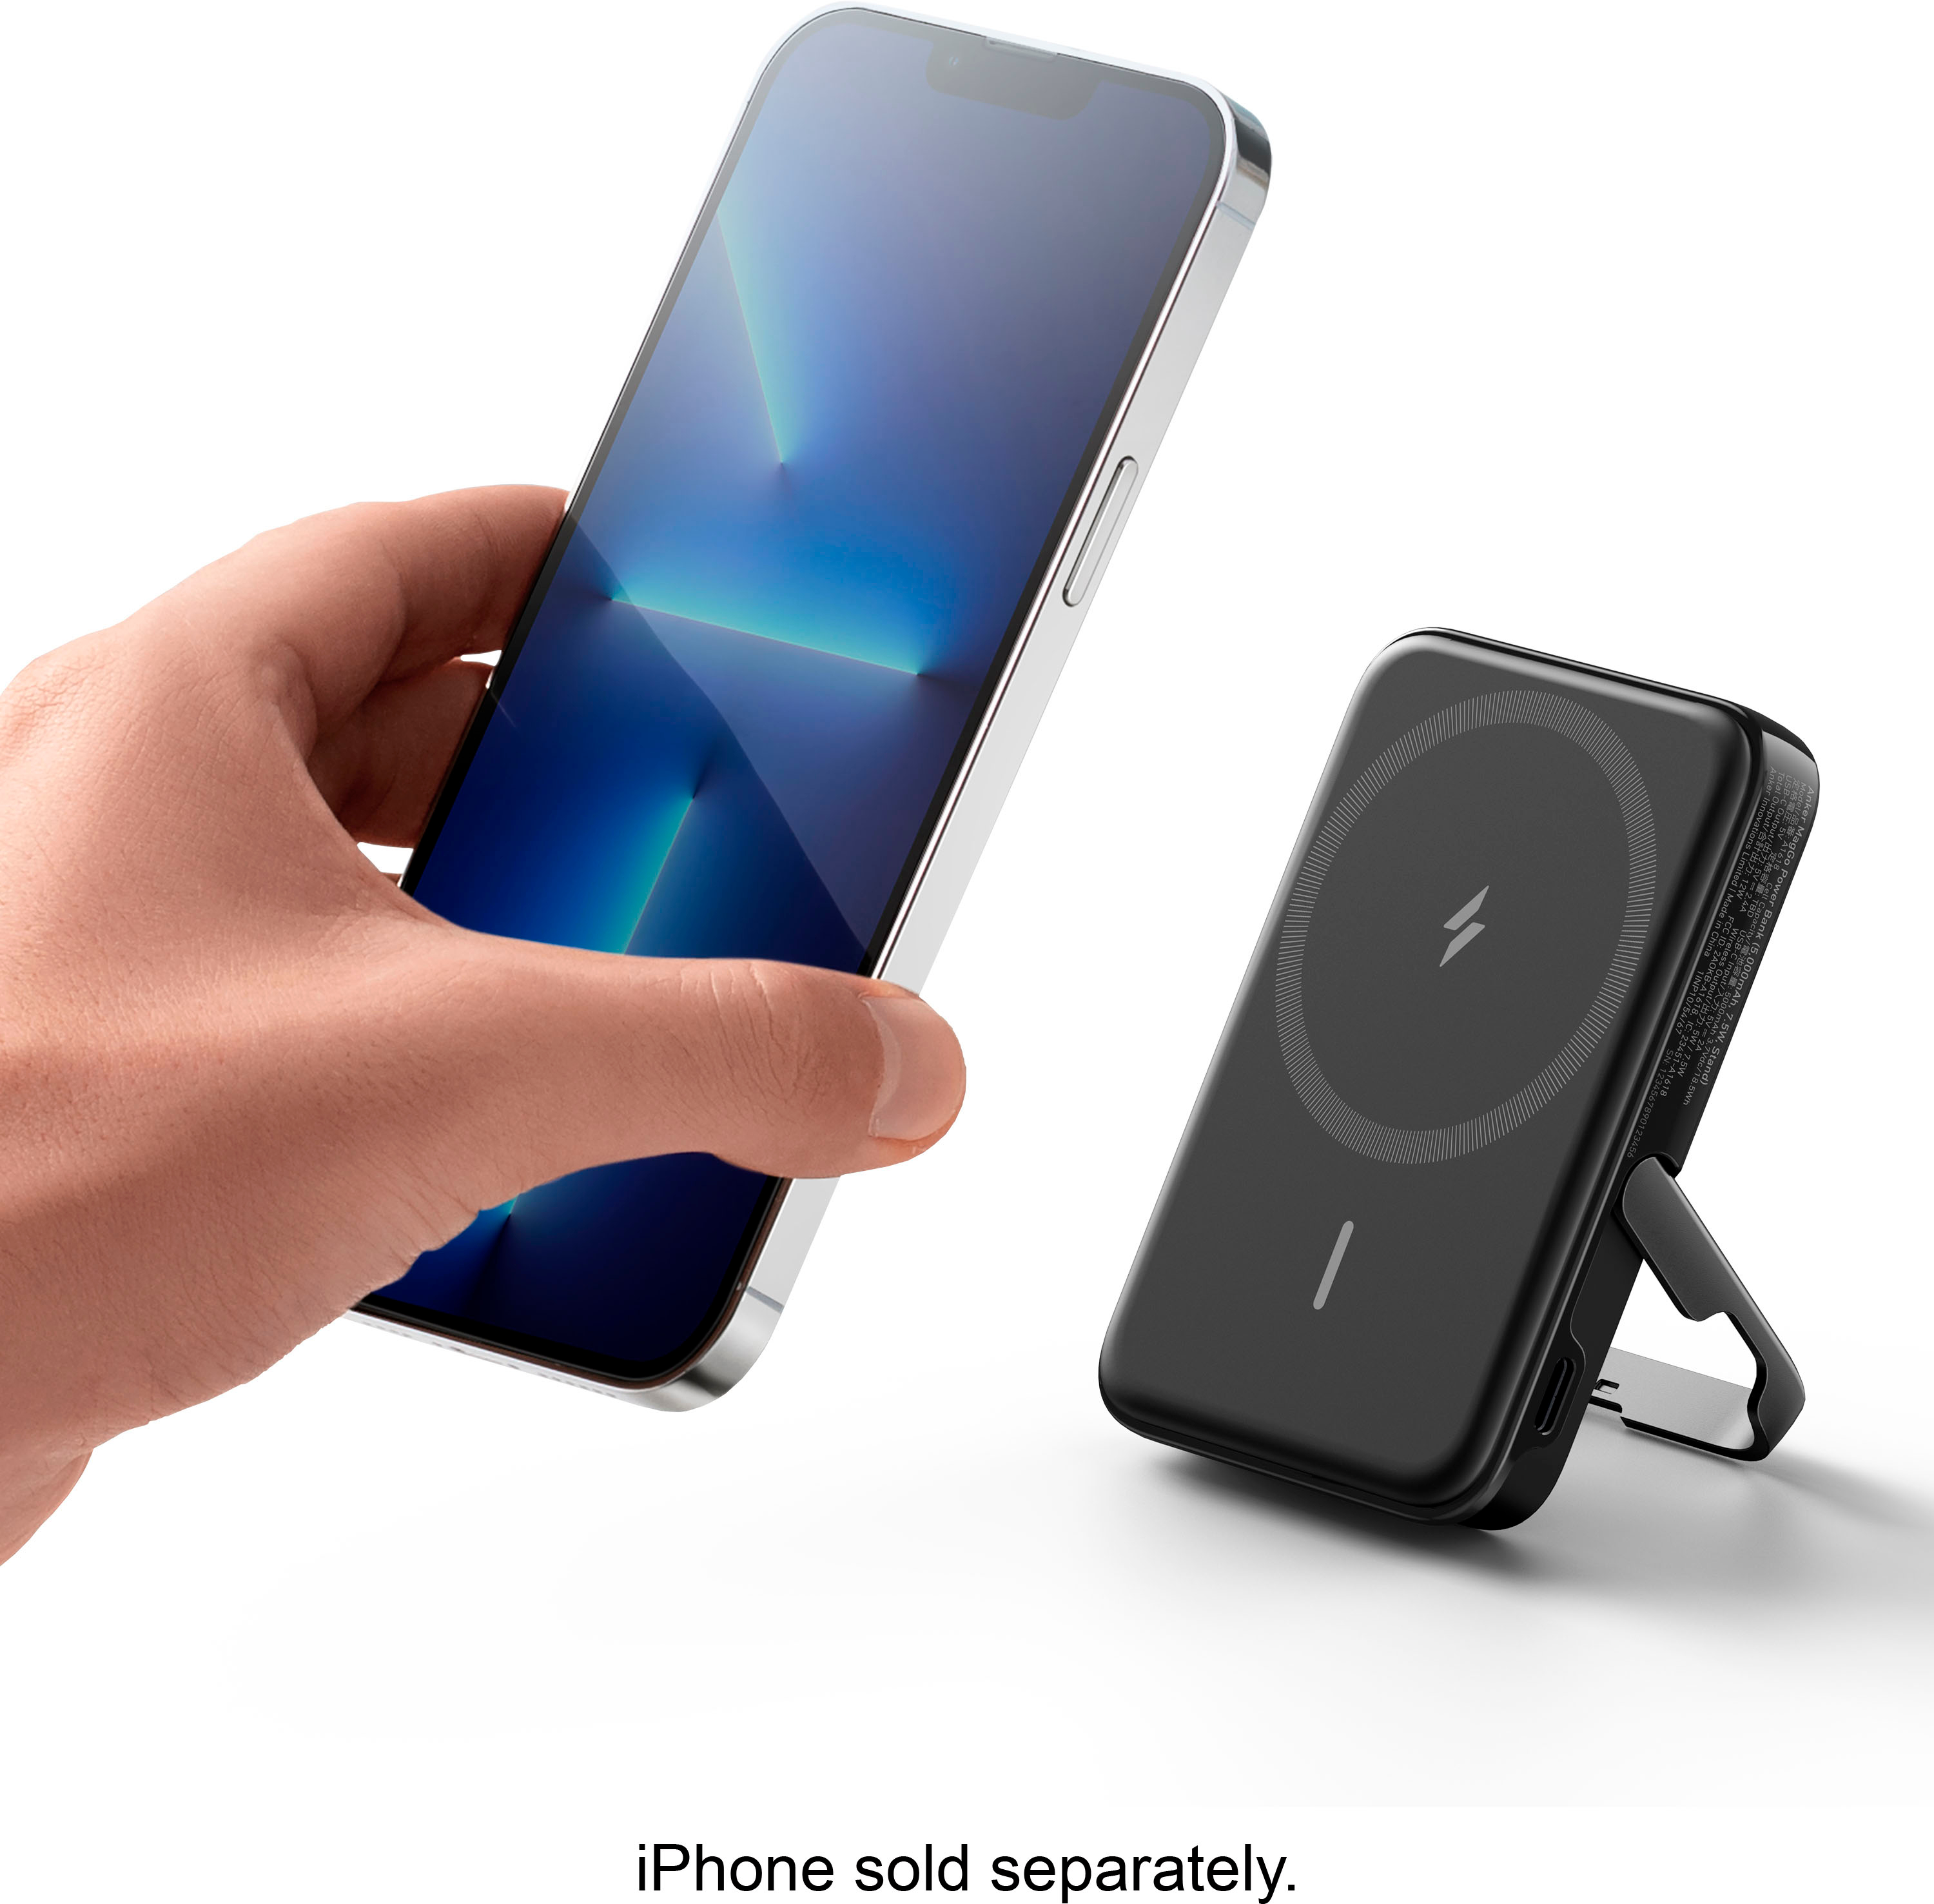 Anker MagGo 5,000mAh Mobile Batteries with Stand